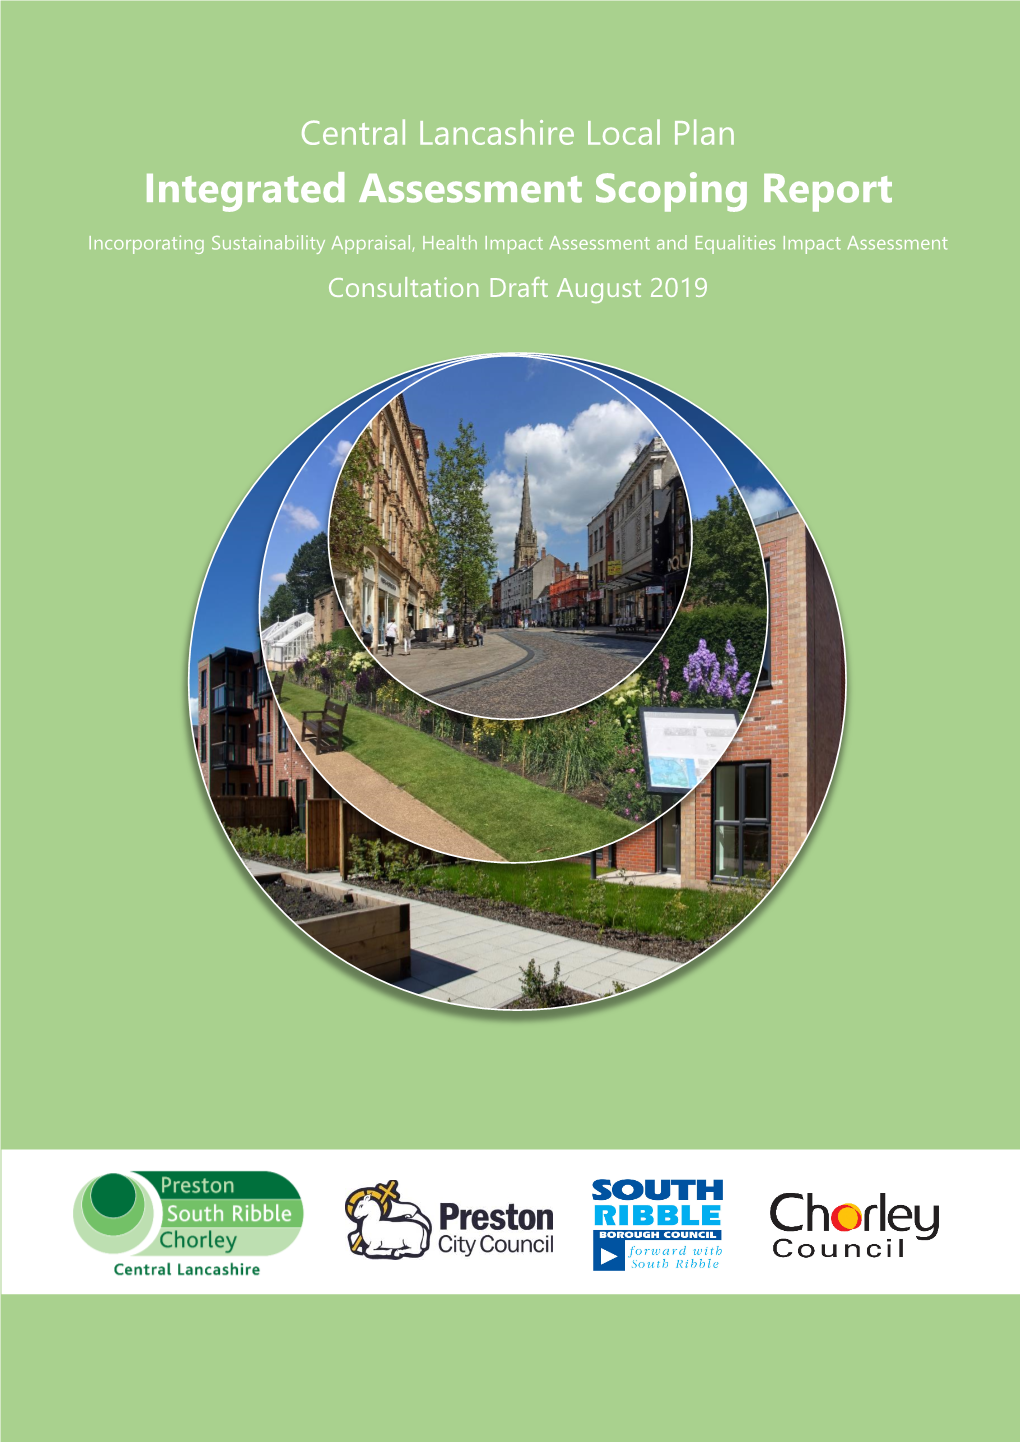 Central Lancashire Local Plan Integrated Assessment Scoping Report